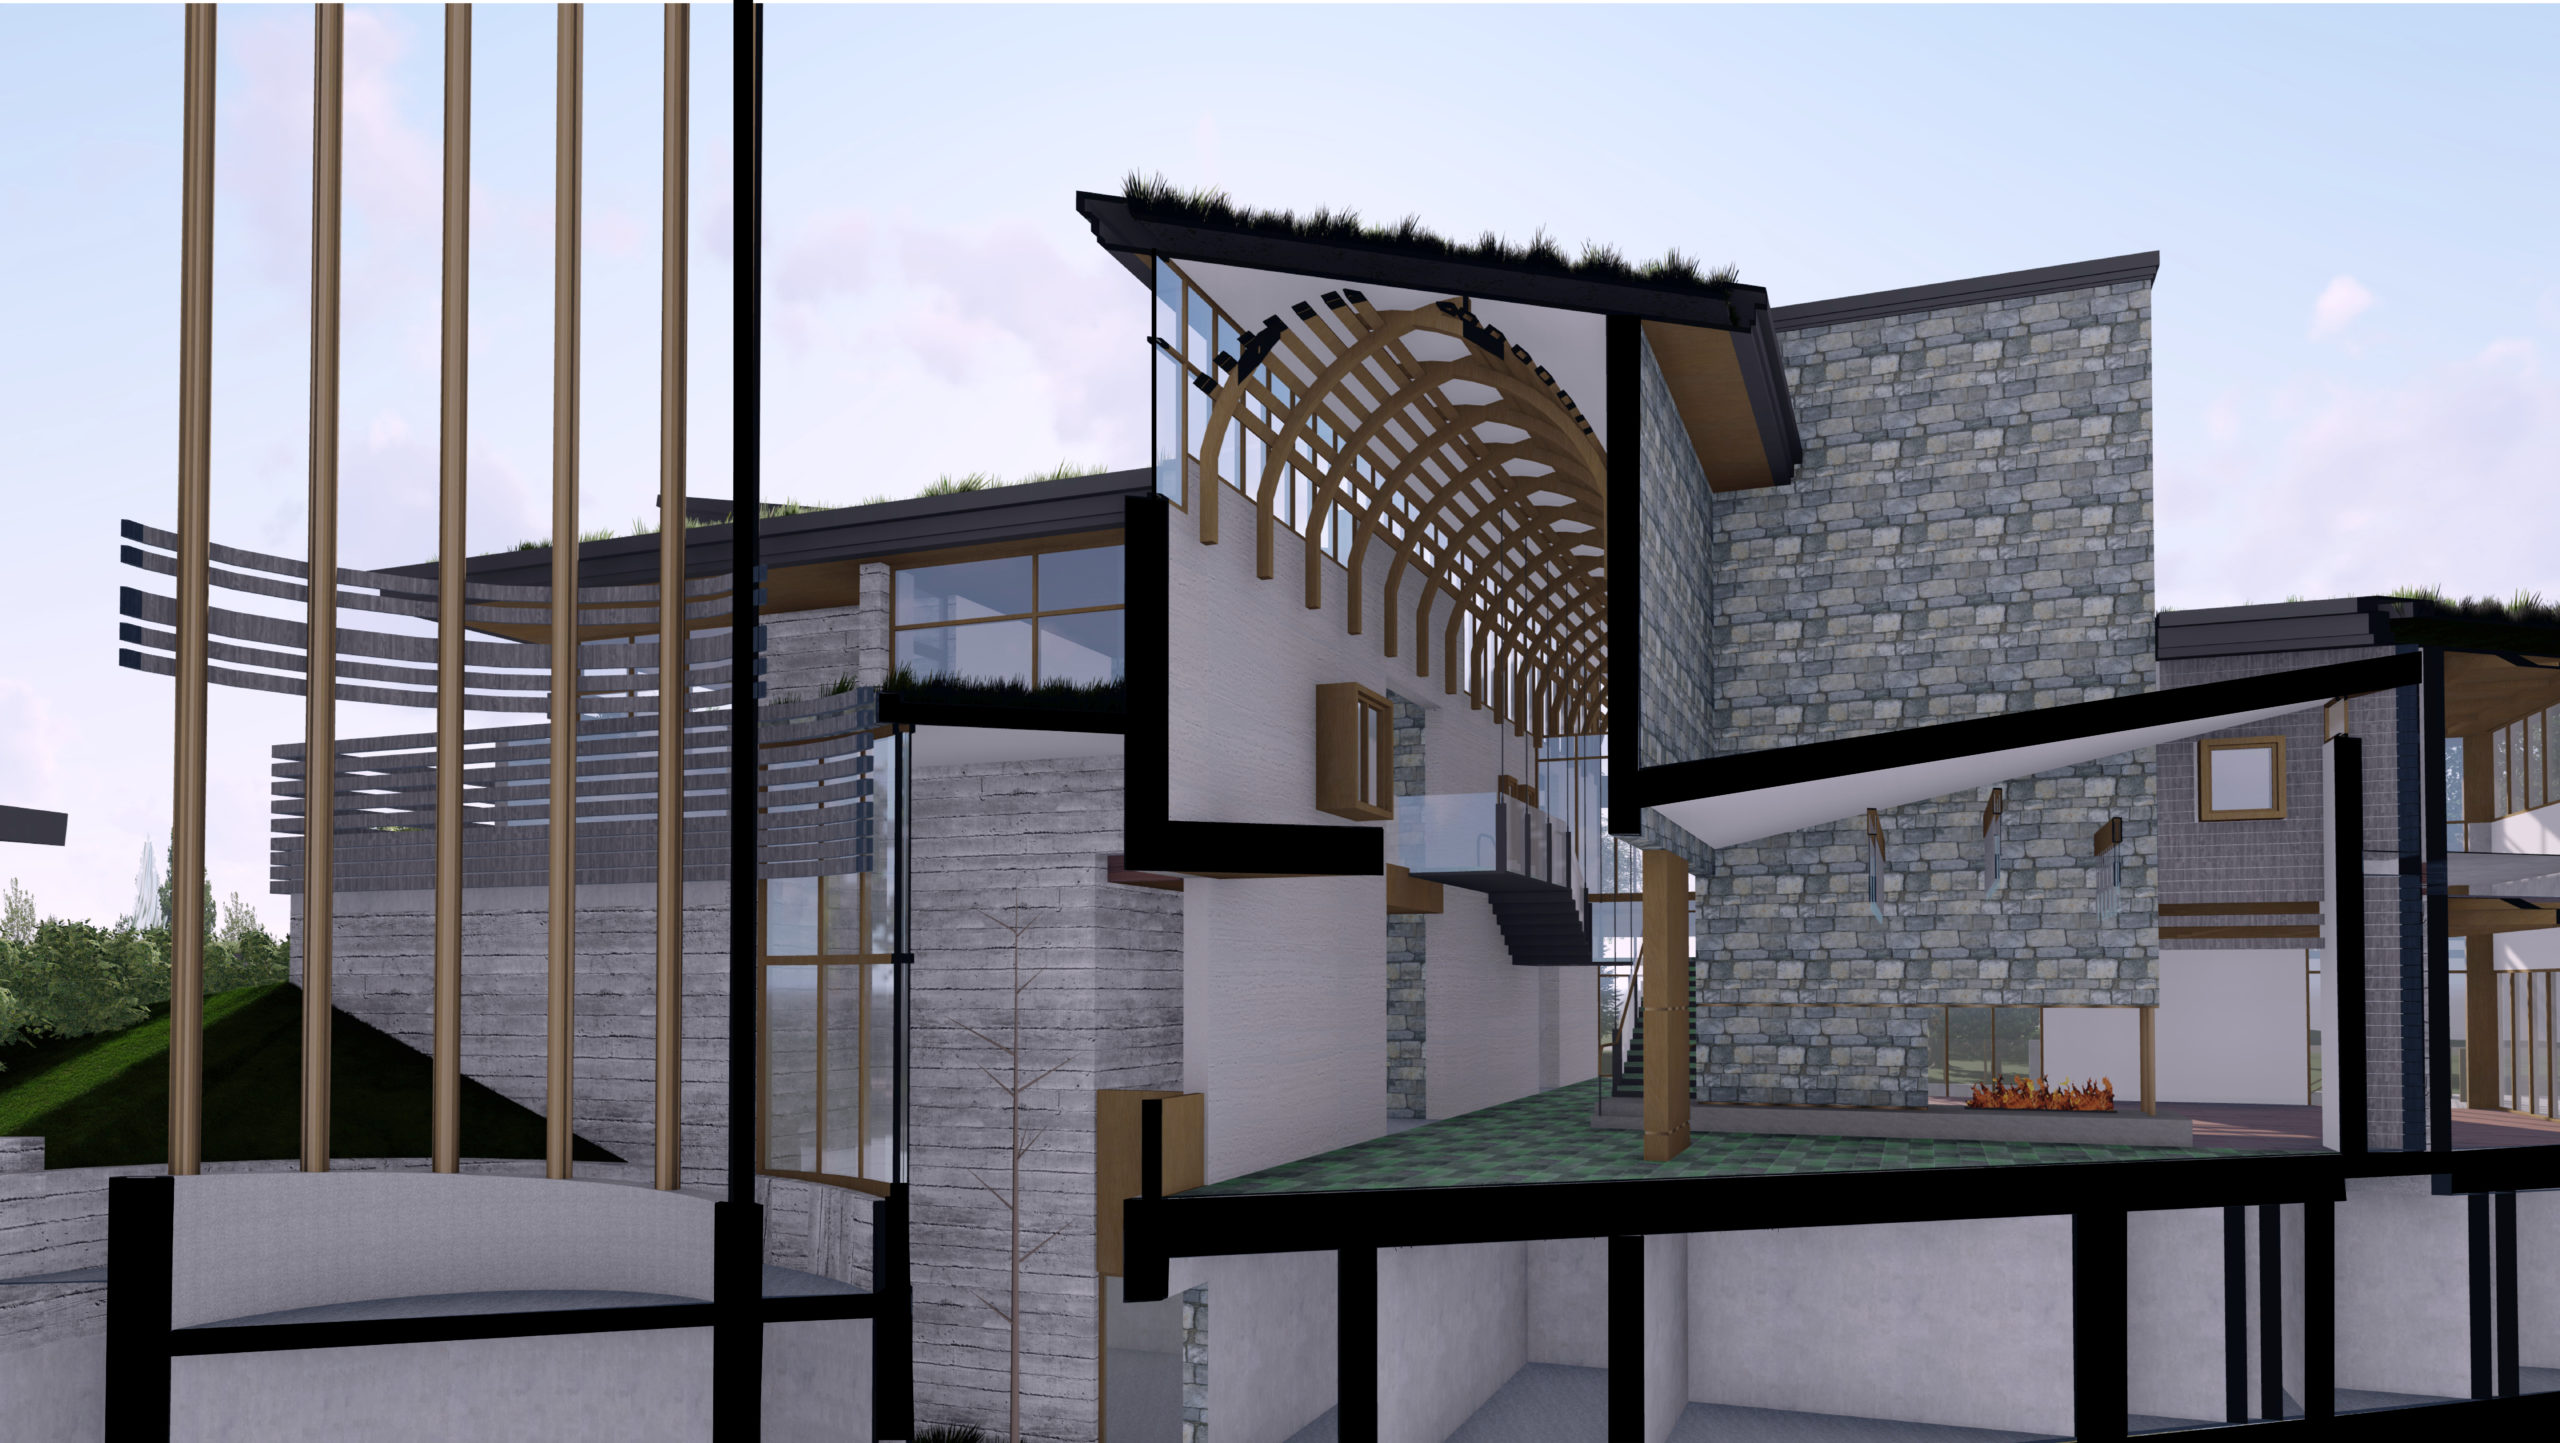 Official wing diagonal cross section through the multi-storey entry hall, dining room and Prime Minister's office